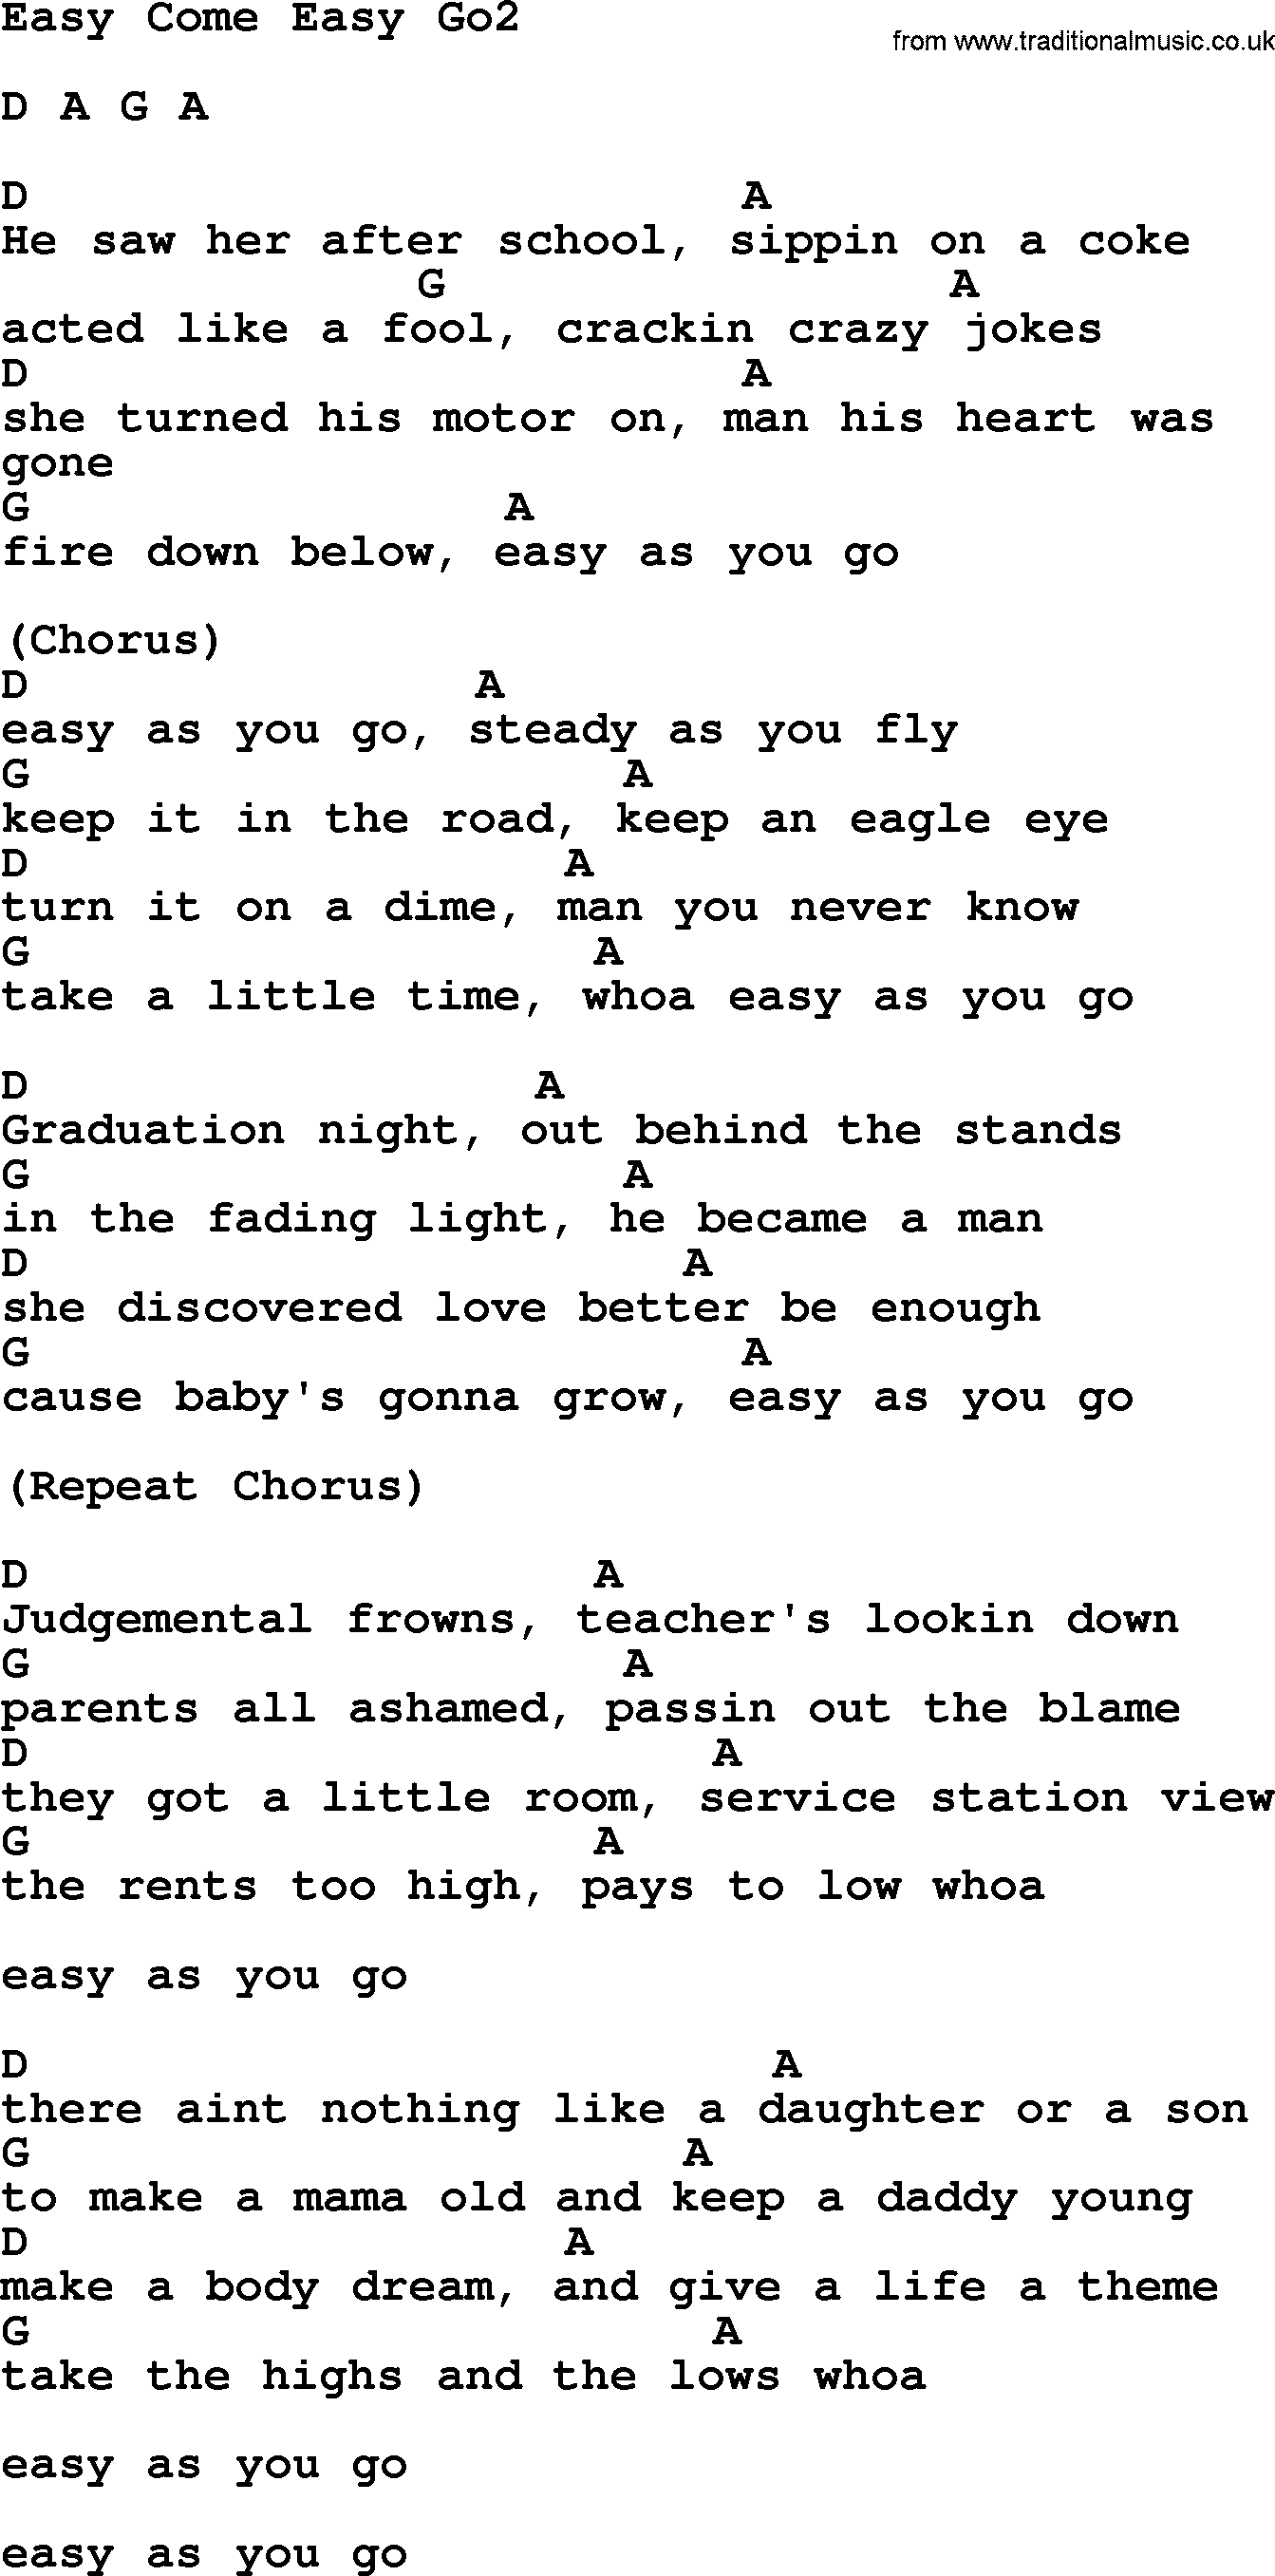 George Strait song: Easy Come Easy Go2, lyrics and chords